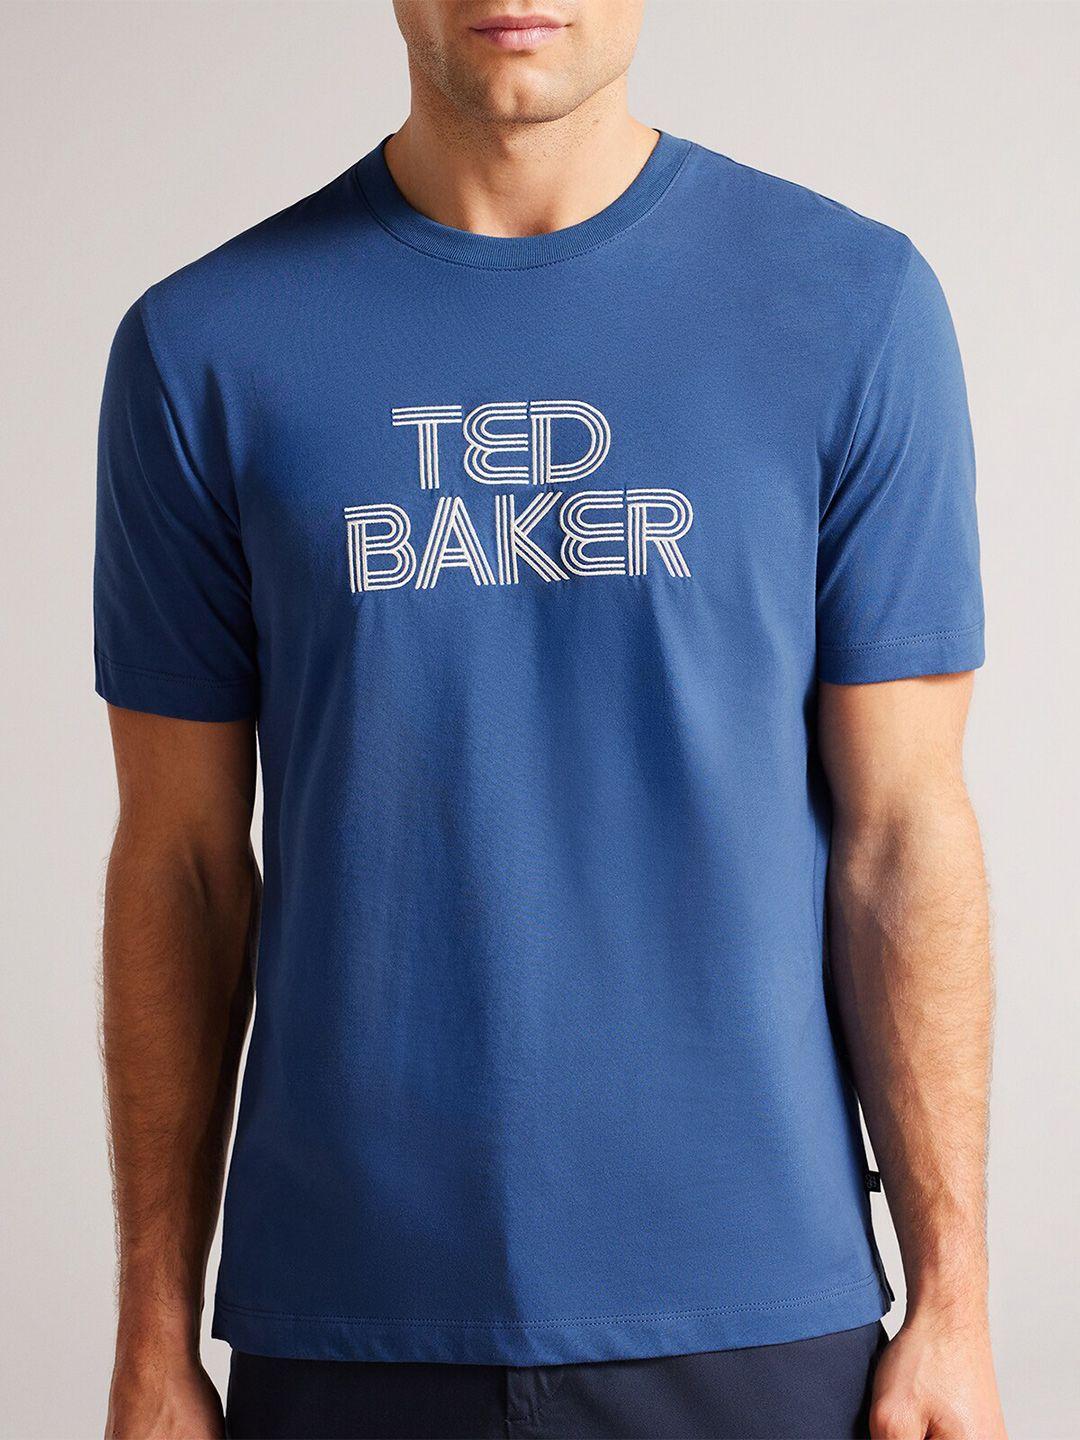 ted baker typography round neck pure cotton t-shirt